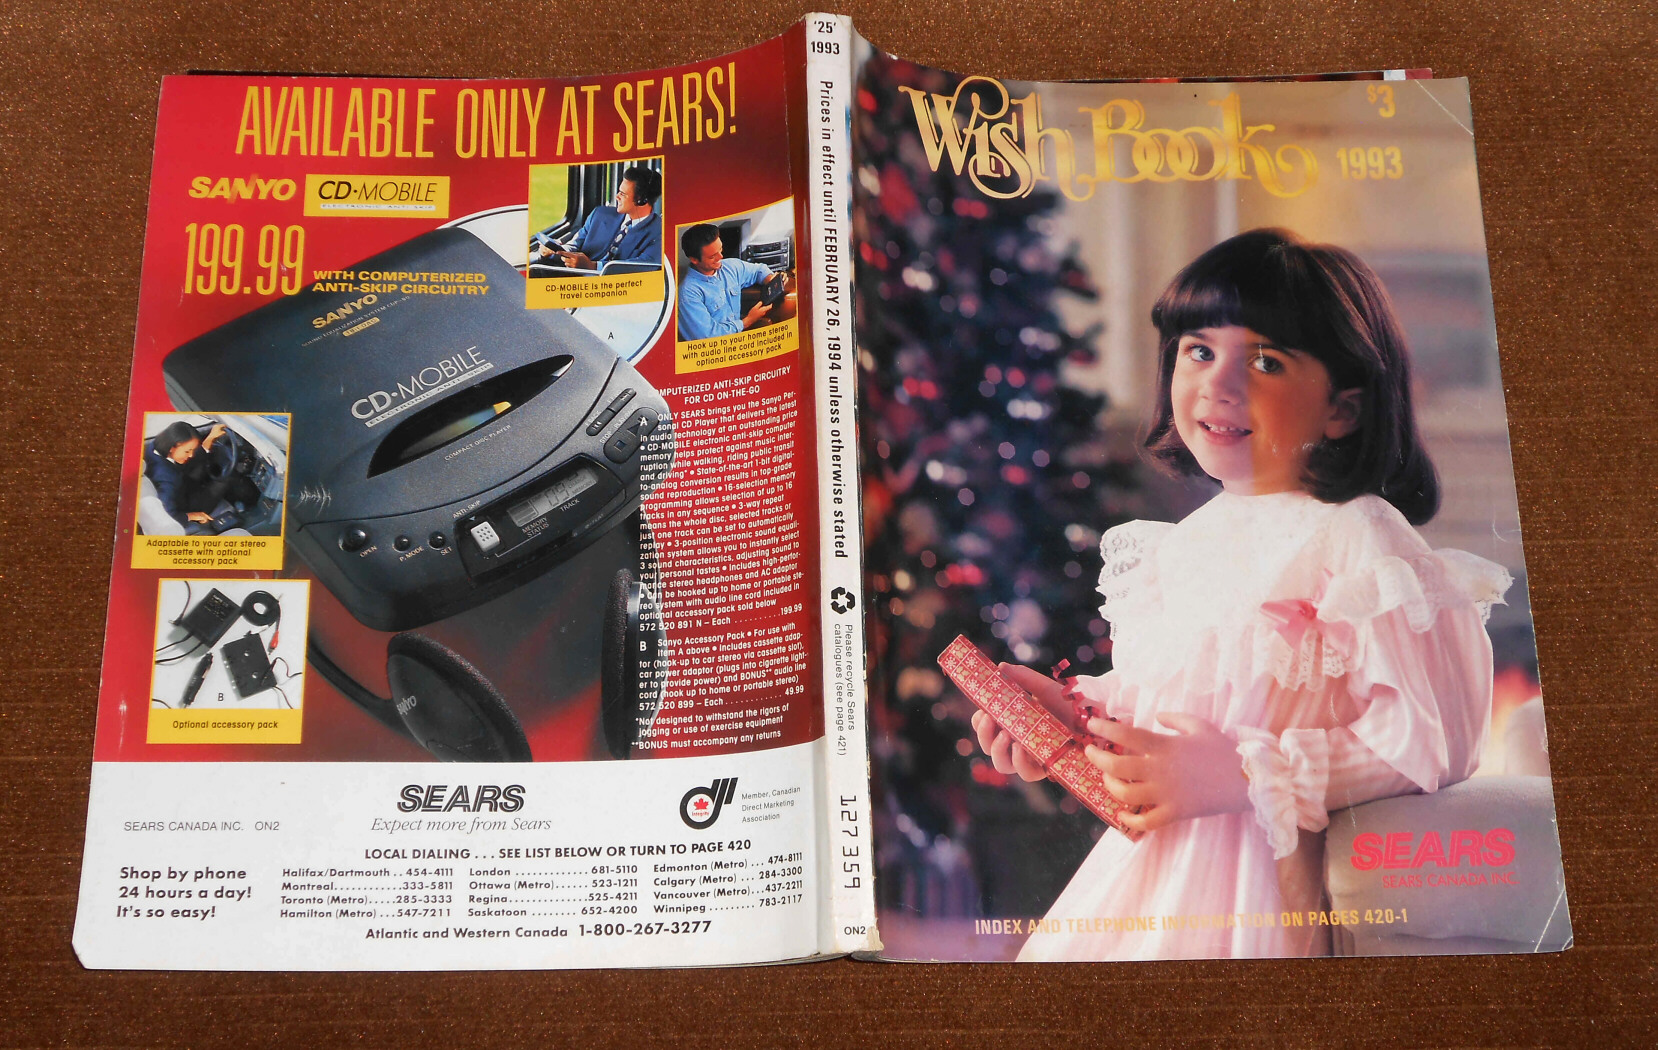 sears wishbook - Available Only At Sears! Presi Wish Rok 1998 Savyo Cd Monte 100 00 lju.Junto rani February 26. 11 CdMobile less wherwise stated Sears Localdiano... See List Show Or Turn To 127 359 Shop by phone 24 hours a day! W W 0042073277